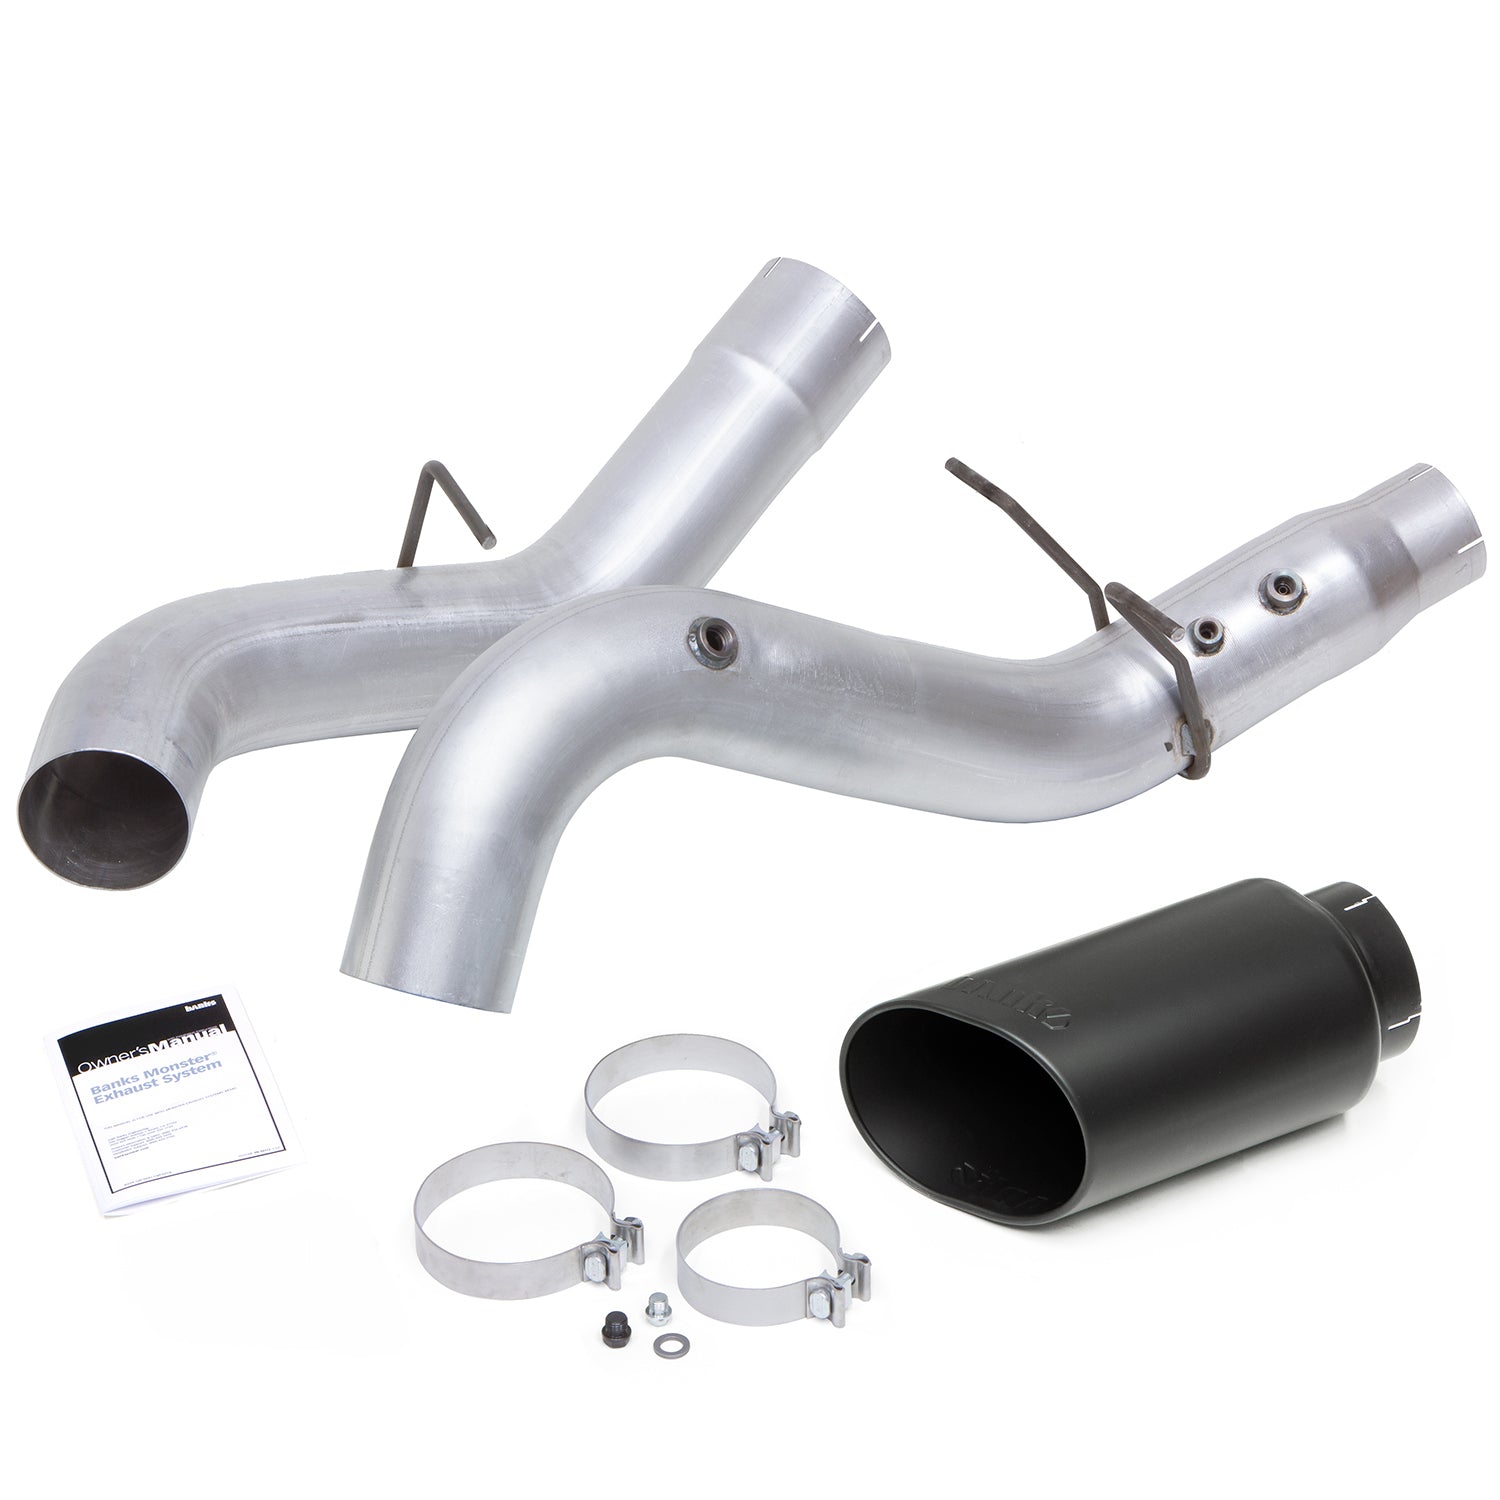 Components of the 5 inch Cerakote Black Monster Exhaust for 2020-2023 Chevy/GMC 2500/3500